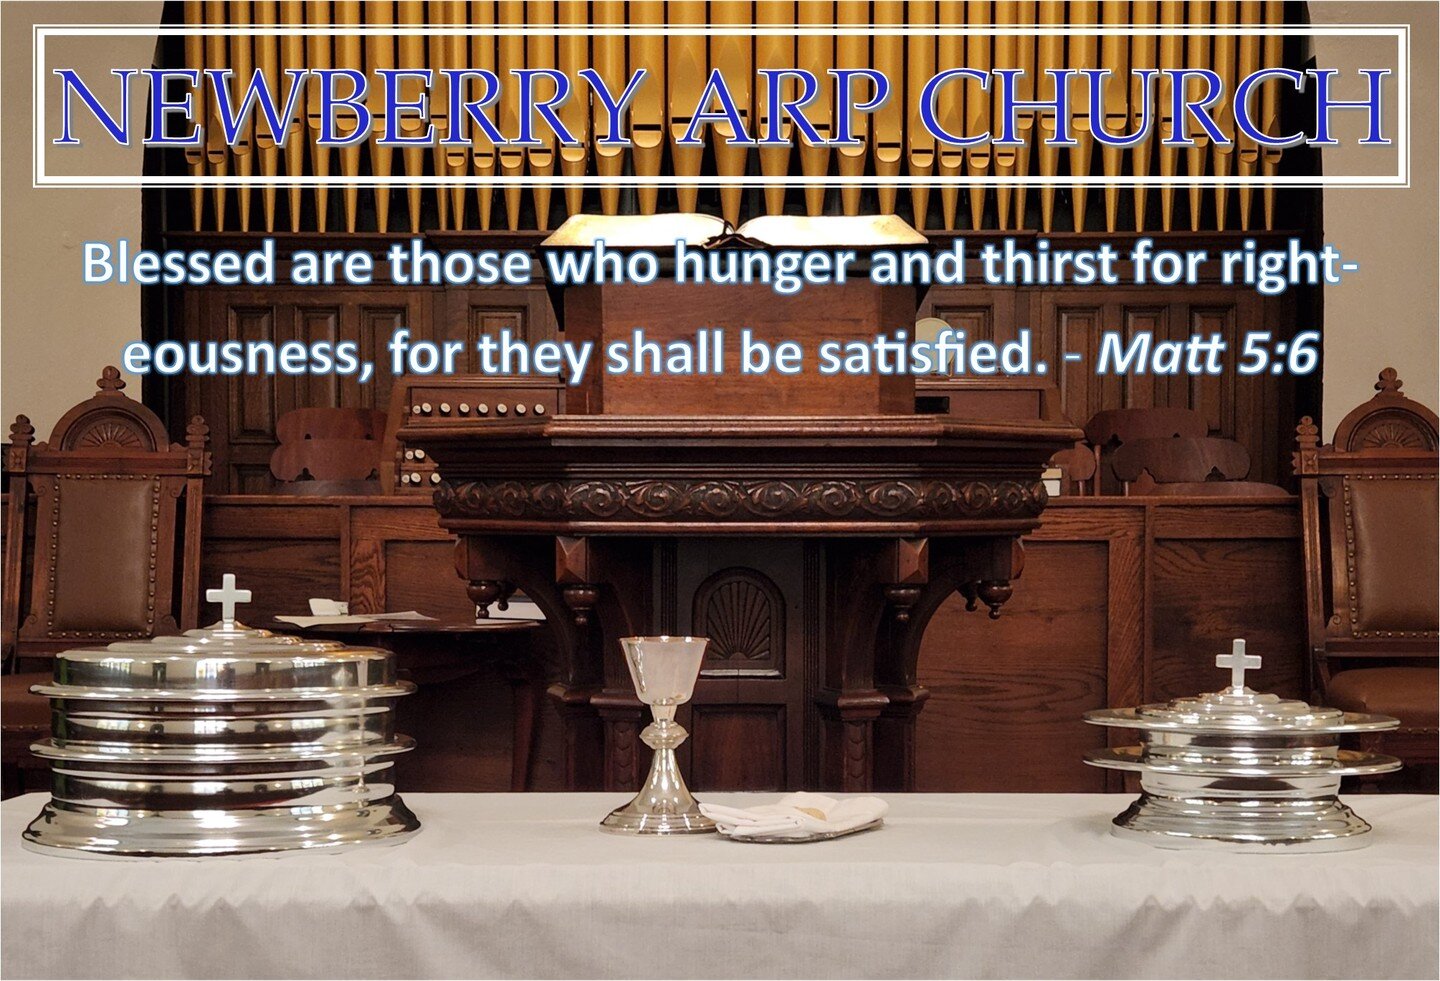 Join us for our Lord's Day corporate worship, 8/28/22, at 10:55 AM, on the corner of Main and Calhoun Streets as we nourish our souls on the Word and Sacrament! 
A copy of this Sunday&rsquo;s bulletin is available at http://www.newberryarp.org/worshi